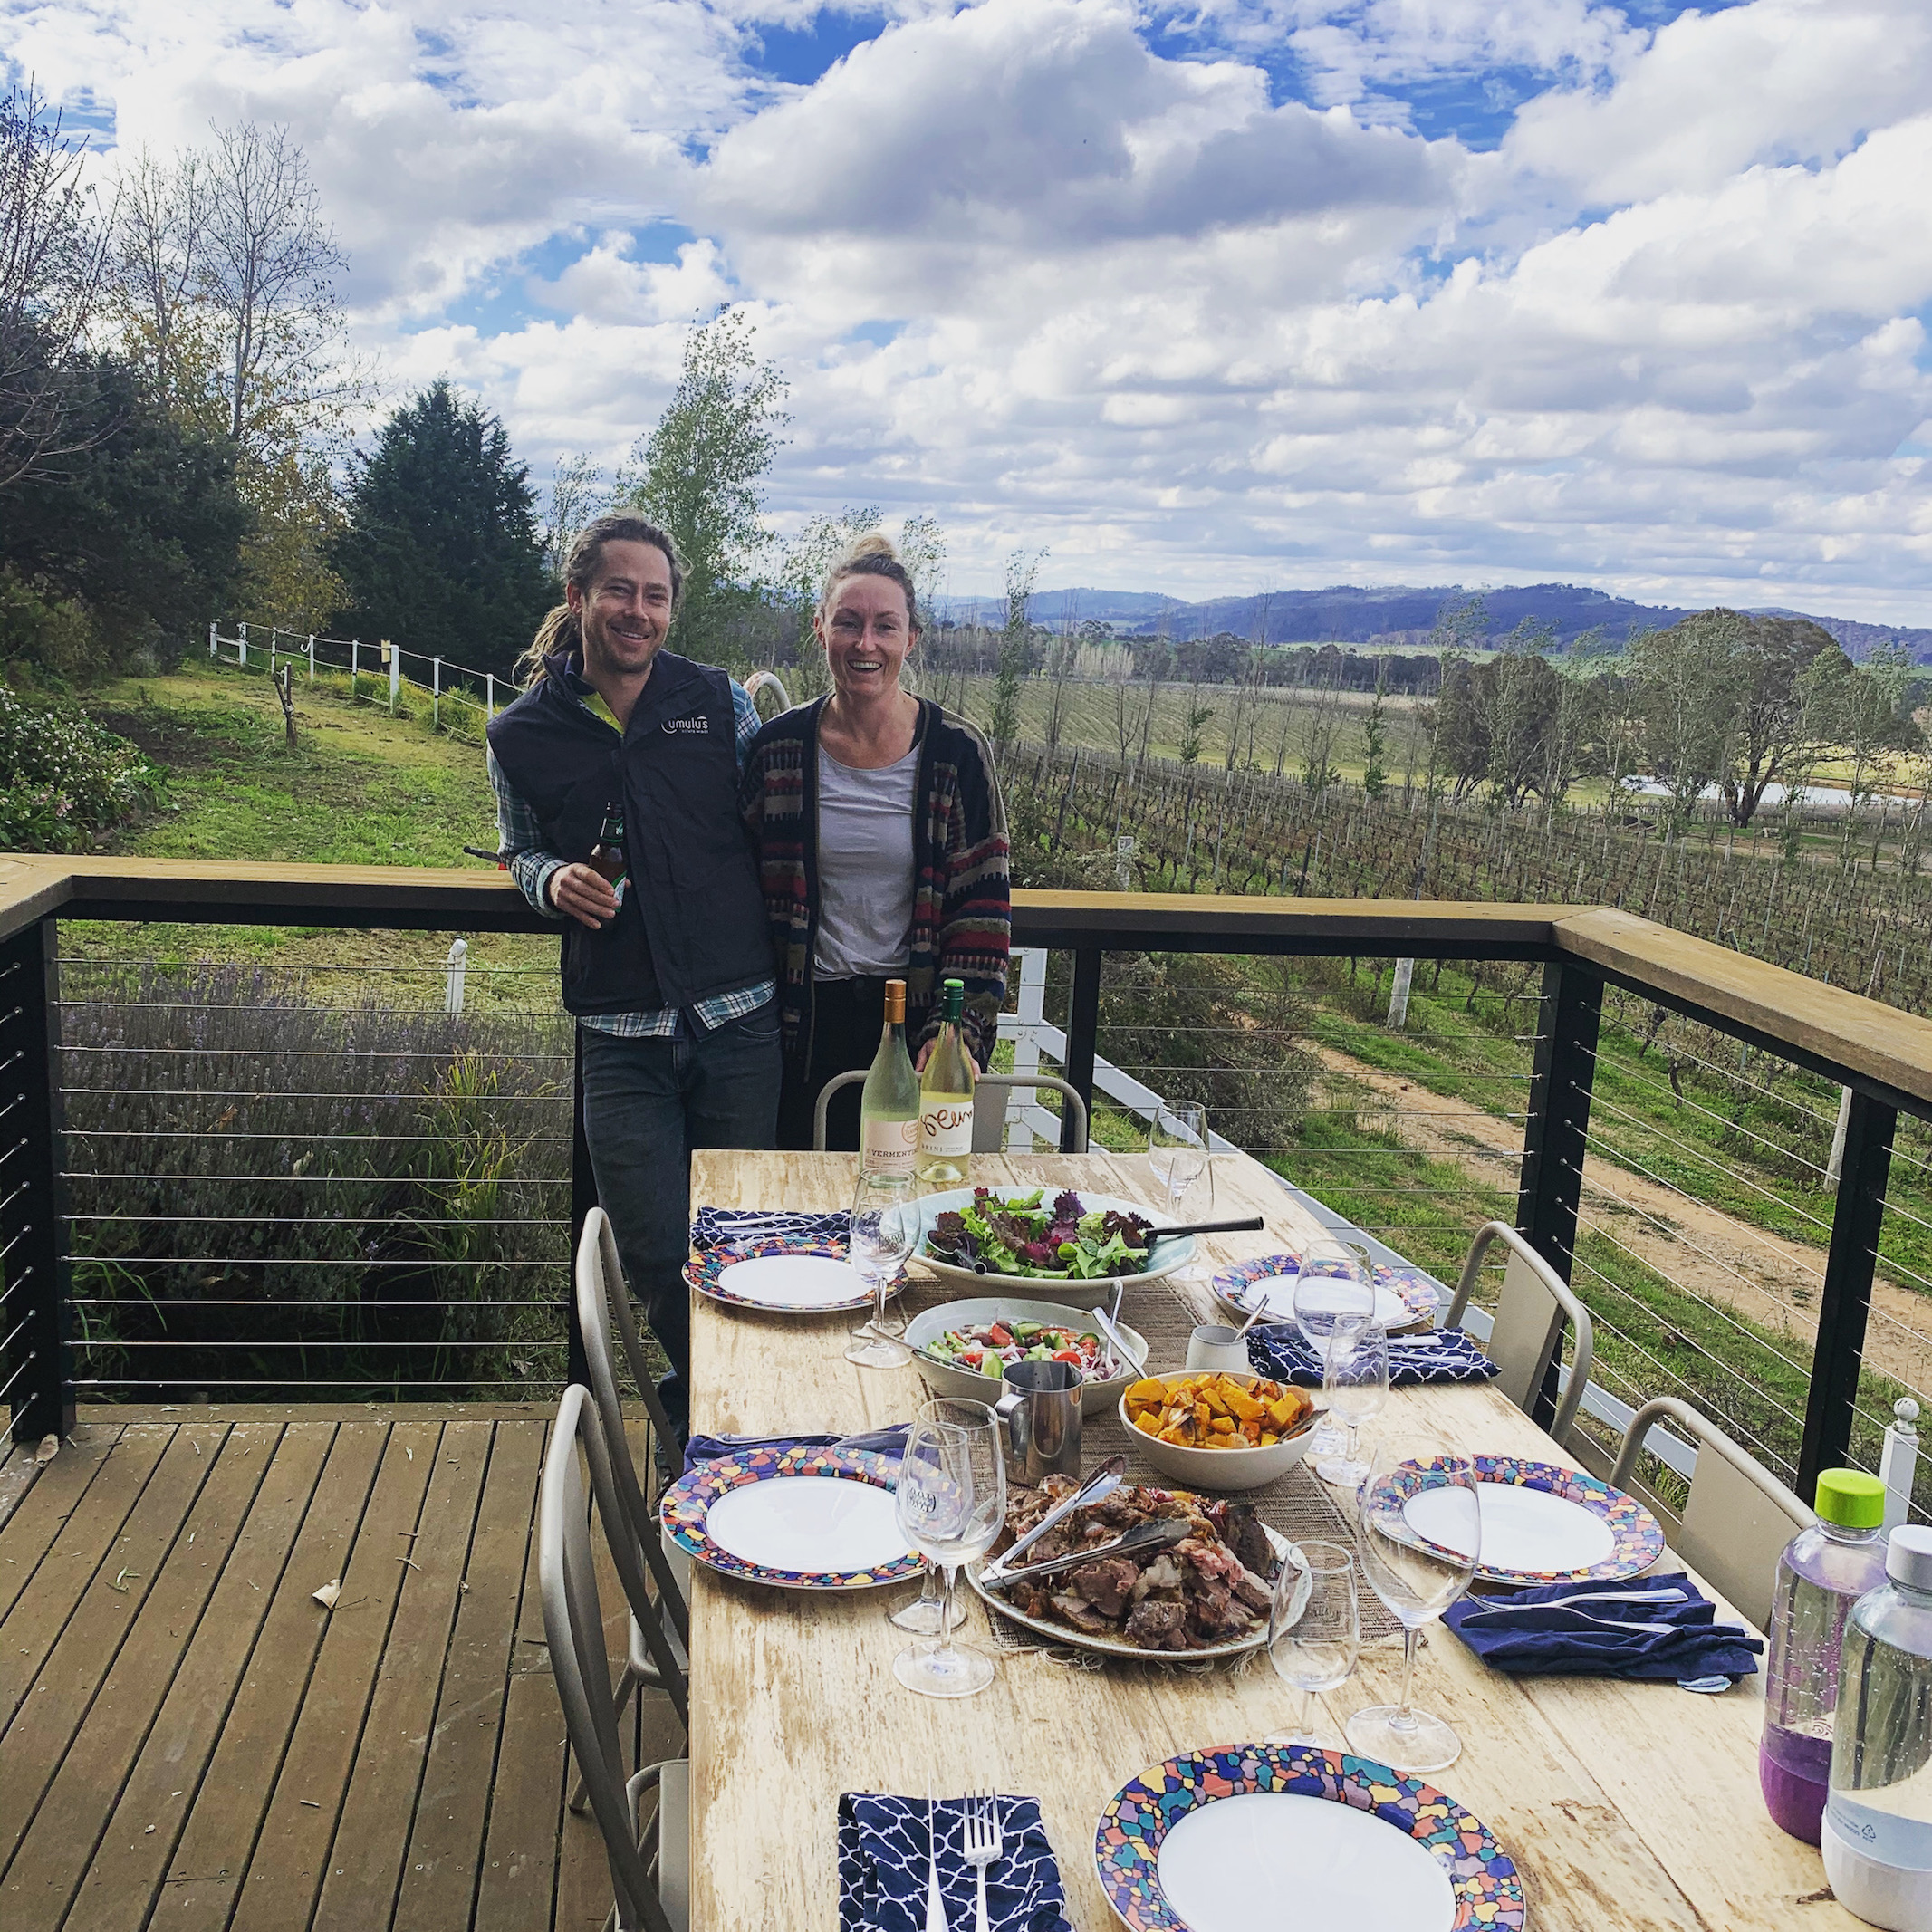 Nadja and Steve celebrating when they first moved into the new property July 2020